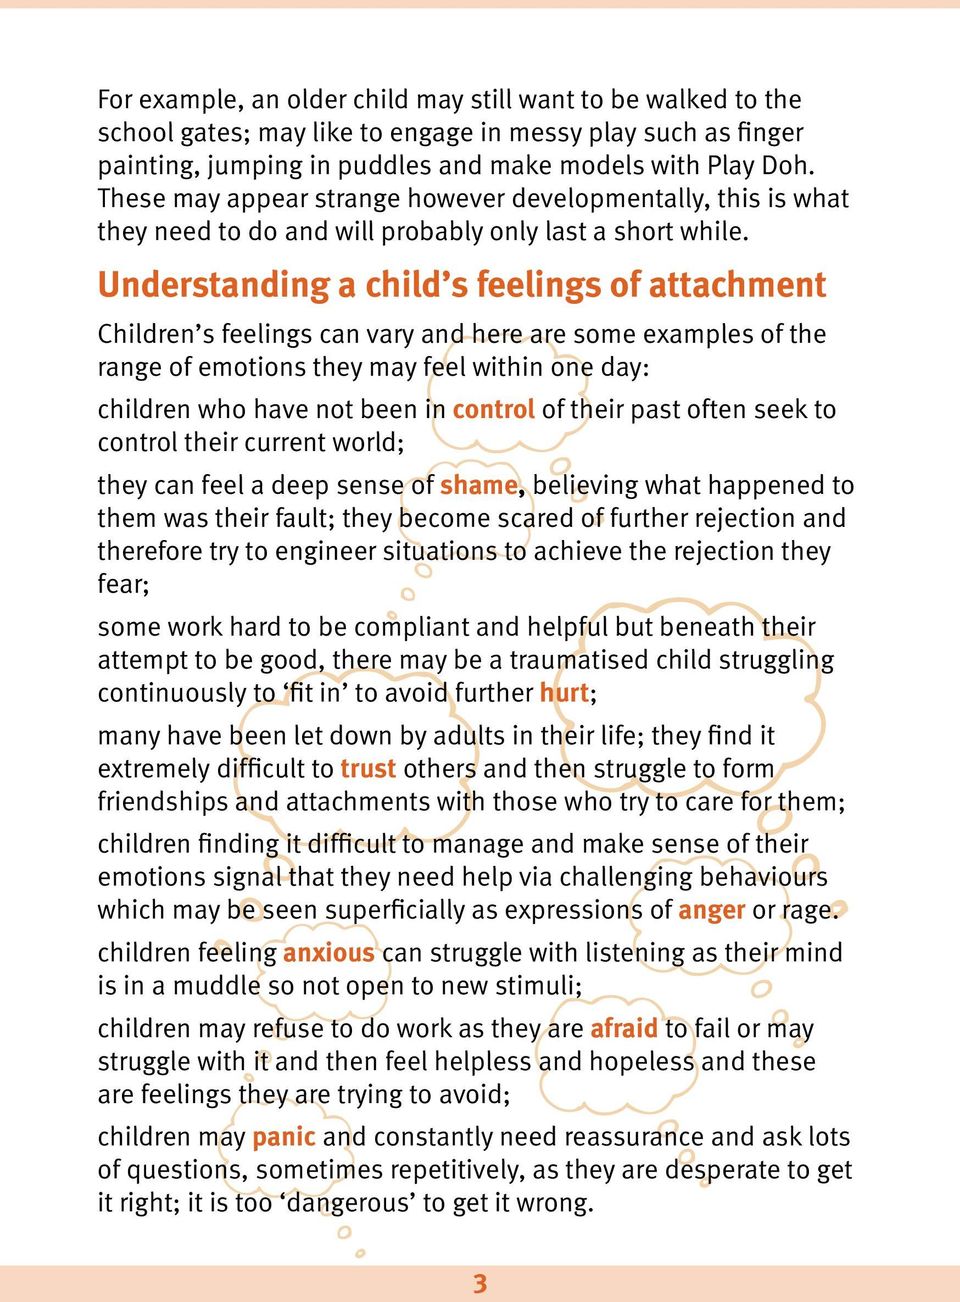 Understanding a child s feelings of attachment Children s feelings can vary and here are some examples of the range of emotions they may feel within one day: children who have not been in control of